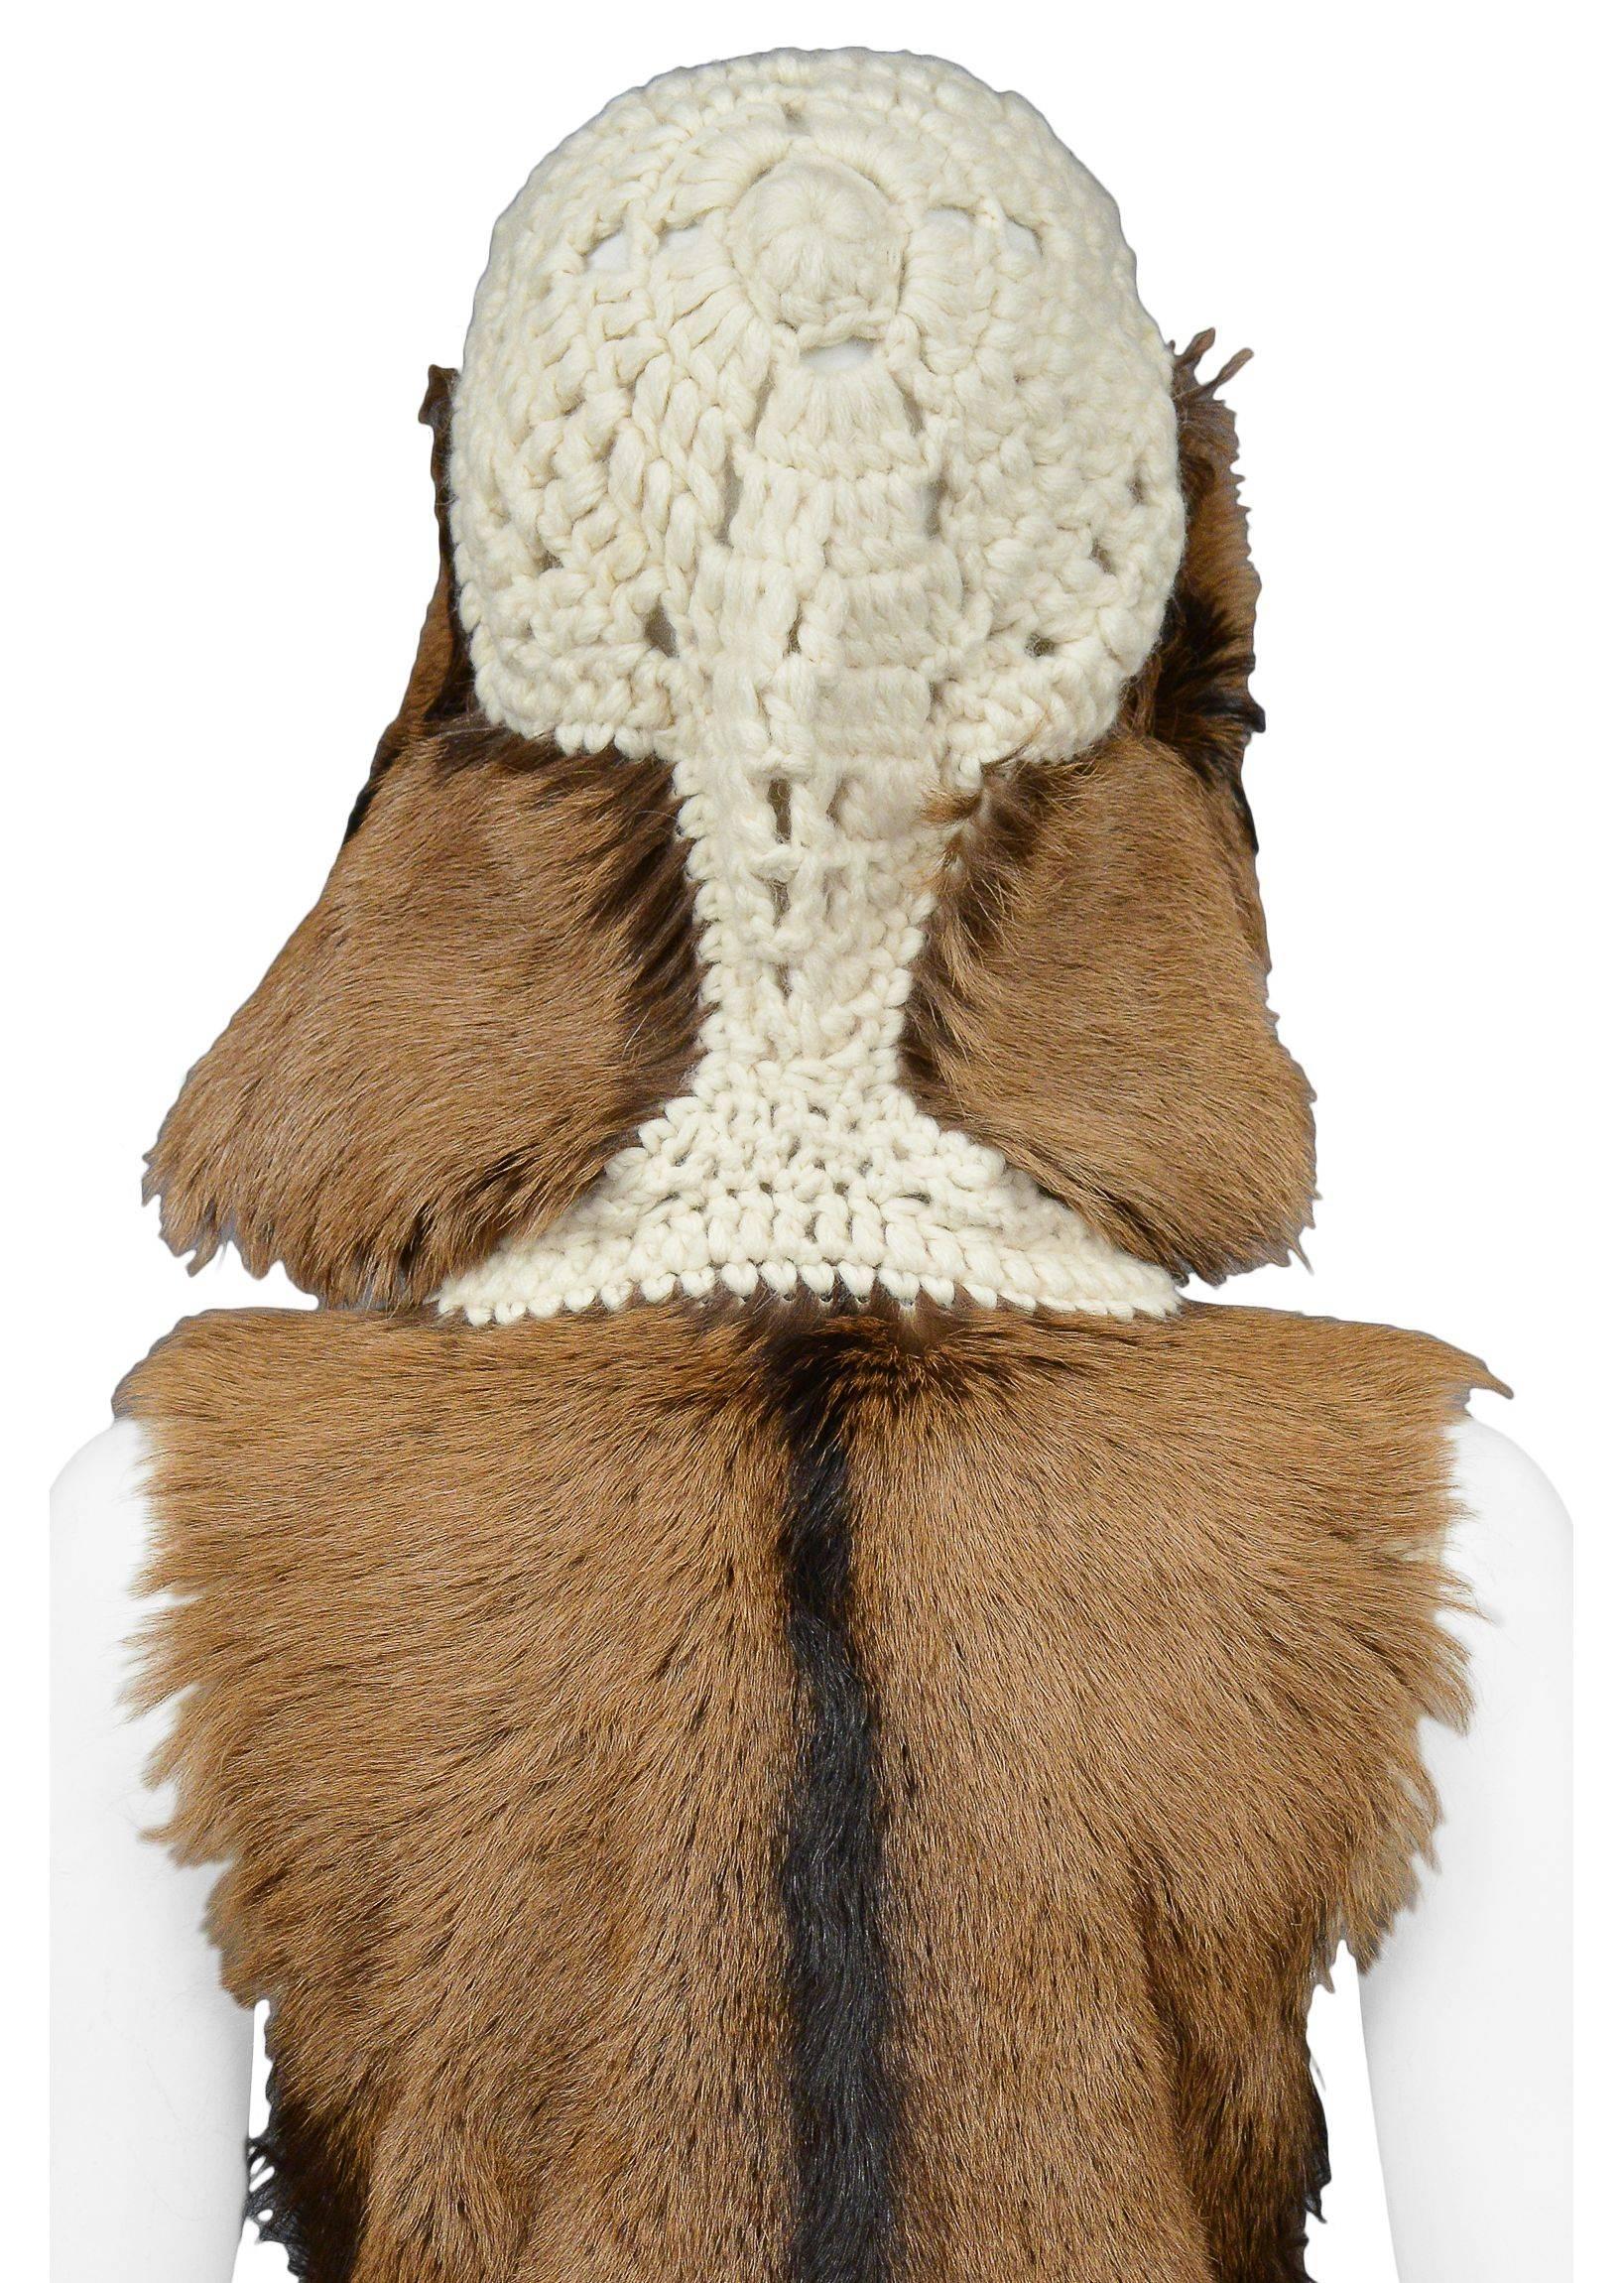 Christian Dior By John Galliano cream crochet and brown alpaca fur vest with exposed zipper and knit hood detail. Collection AW 2001.